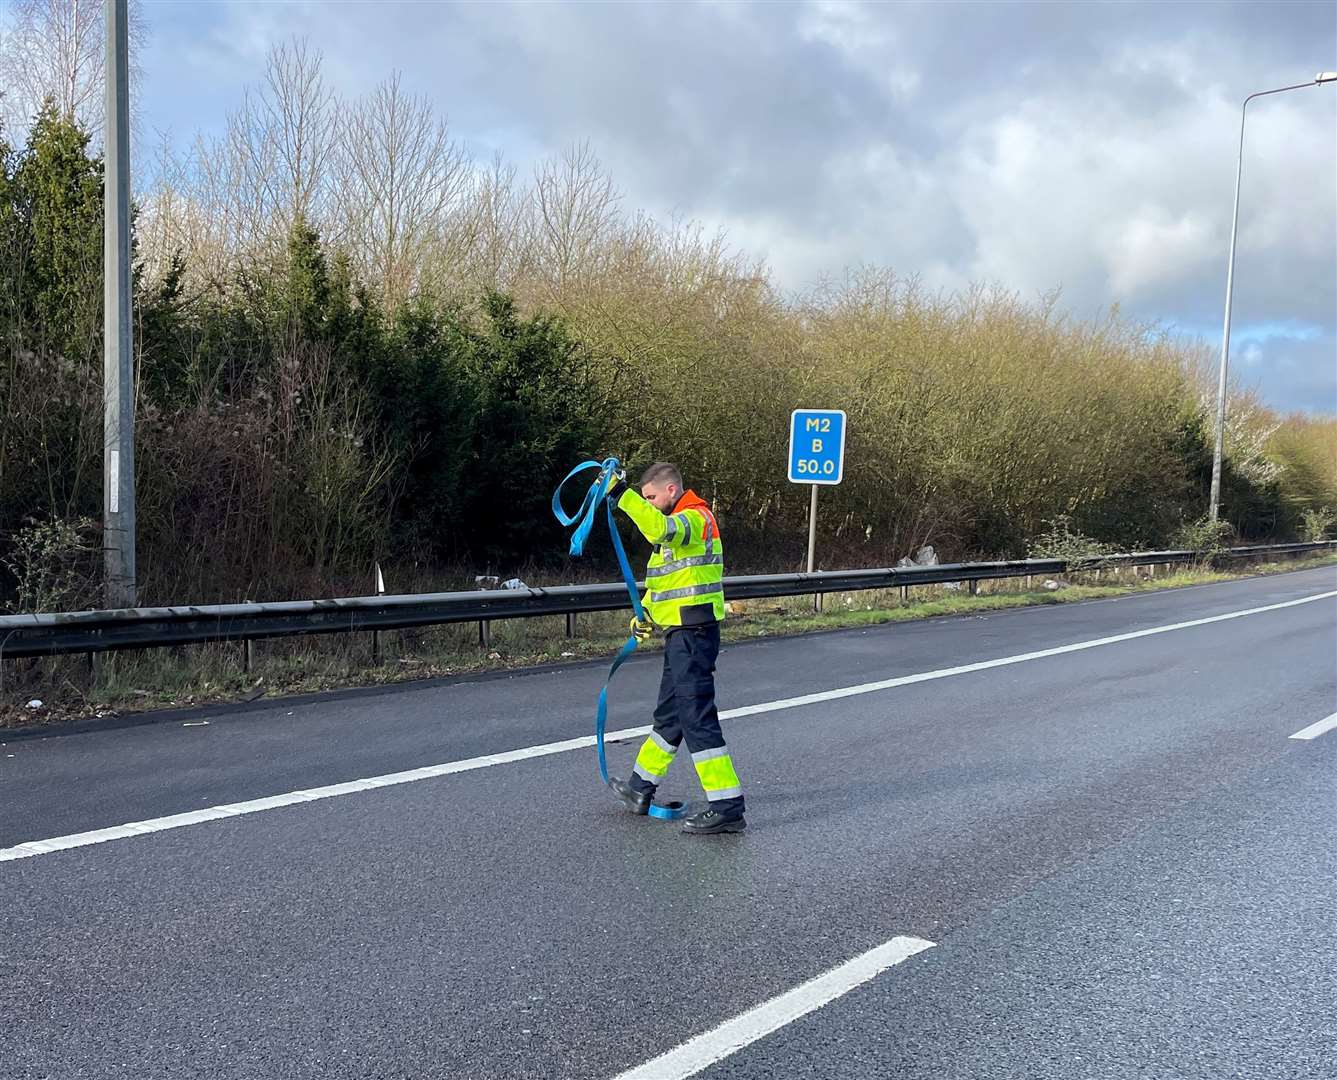 Callum Harkness cleared the M2 carriageway of debris